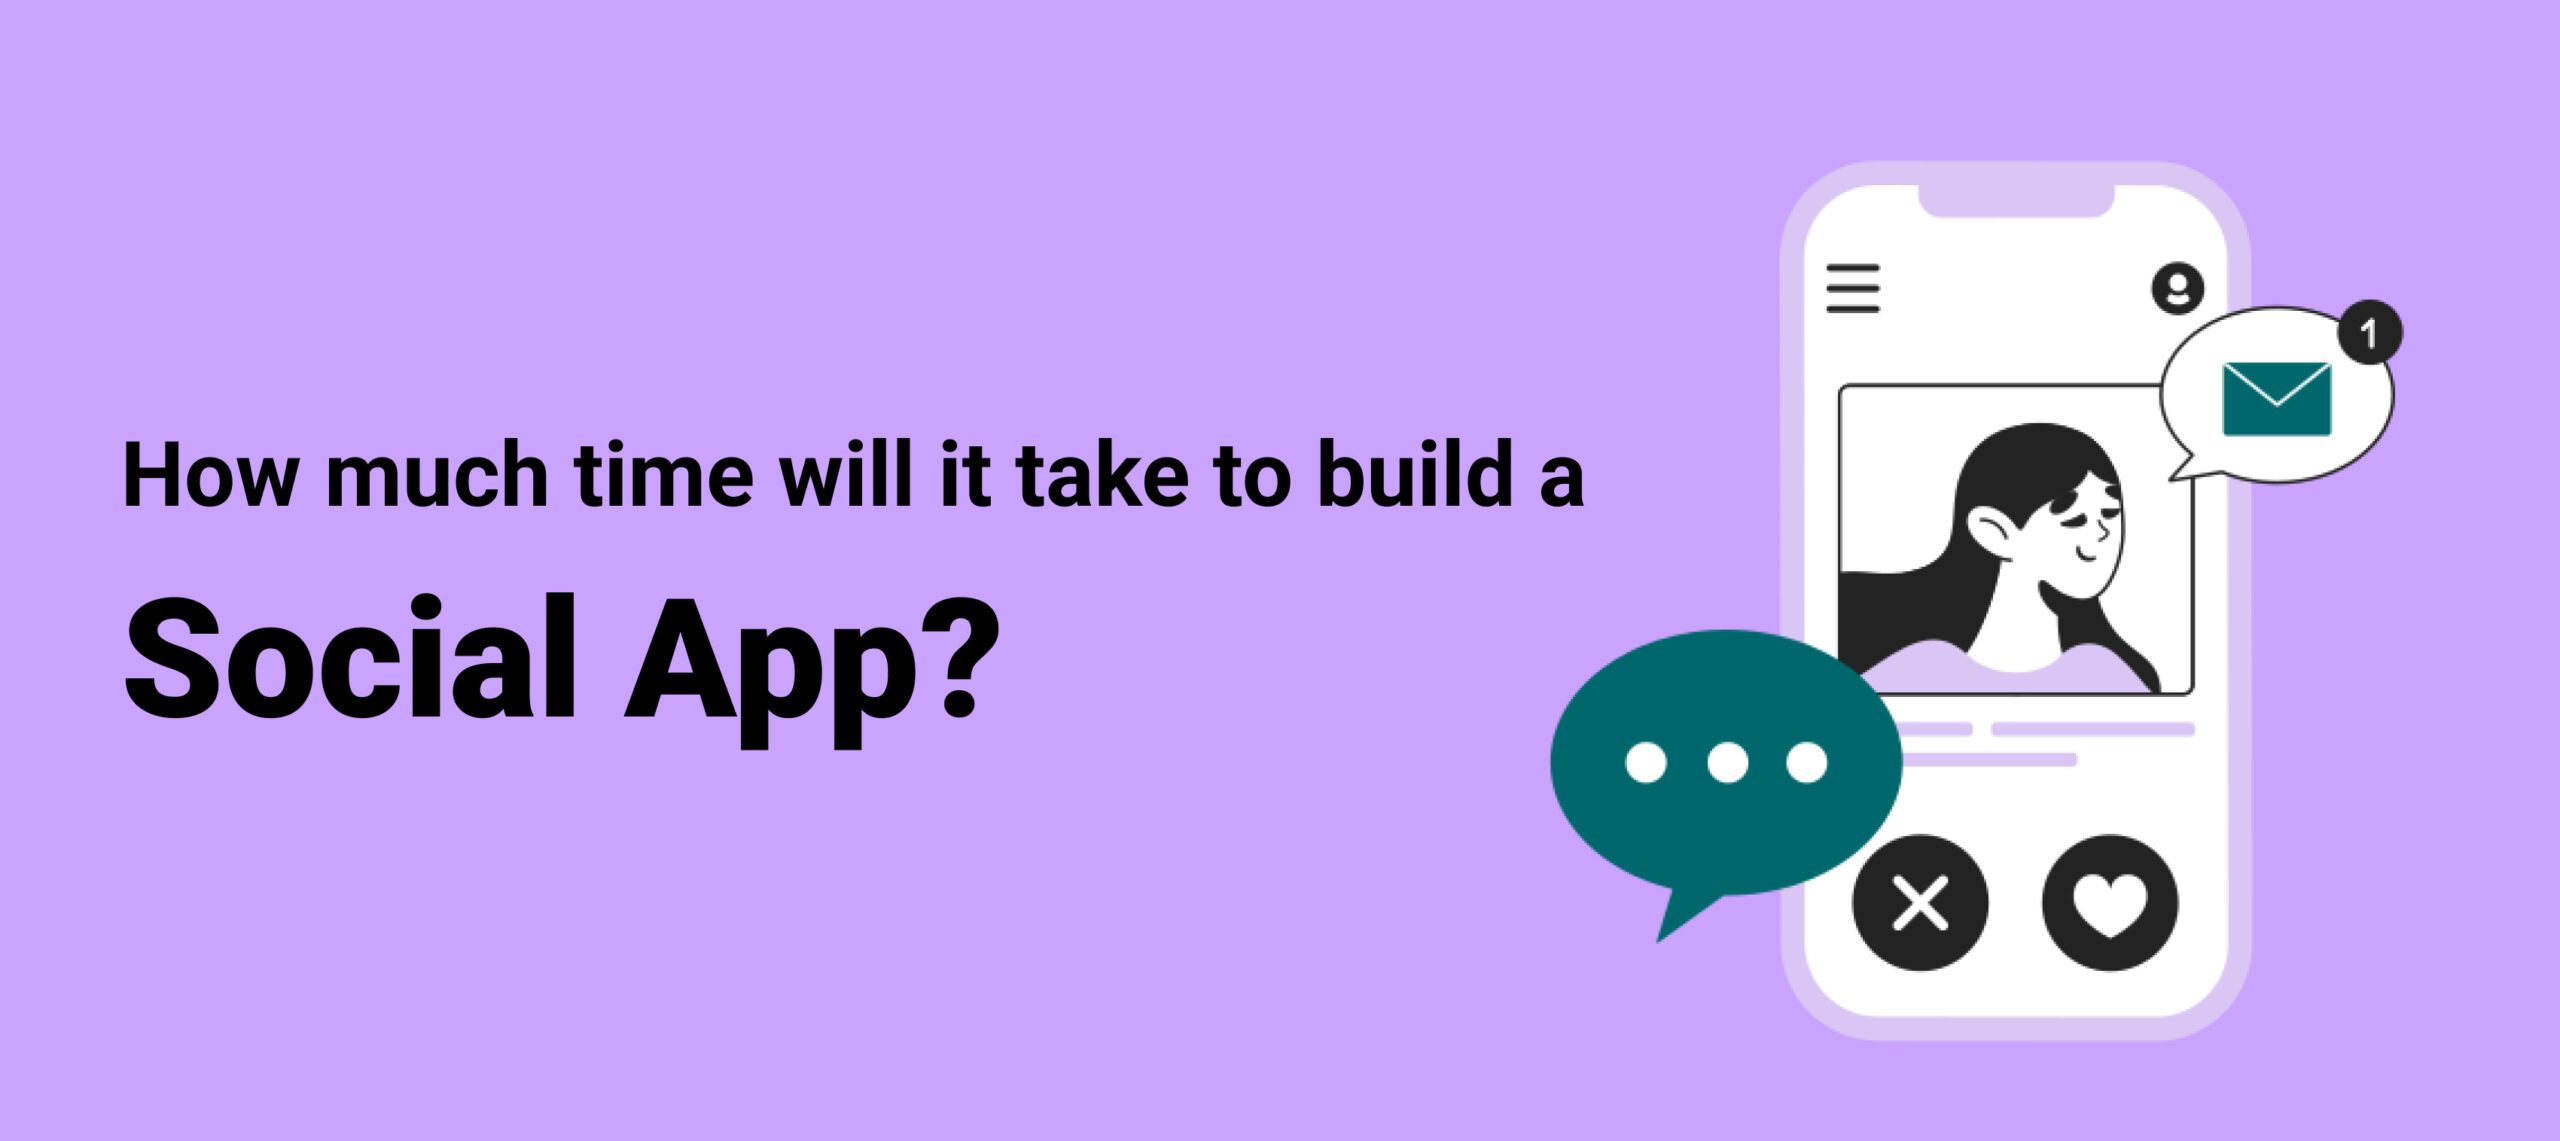  How much time will it take to build a social app?